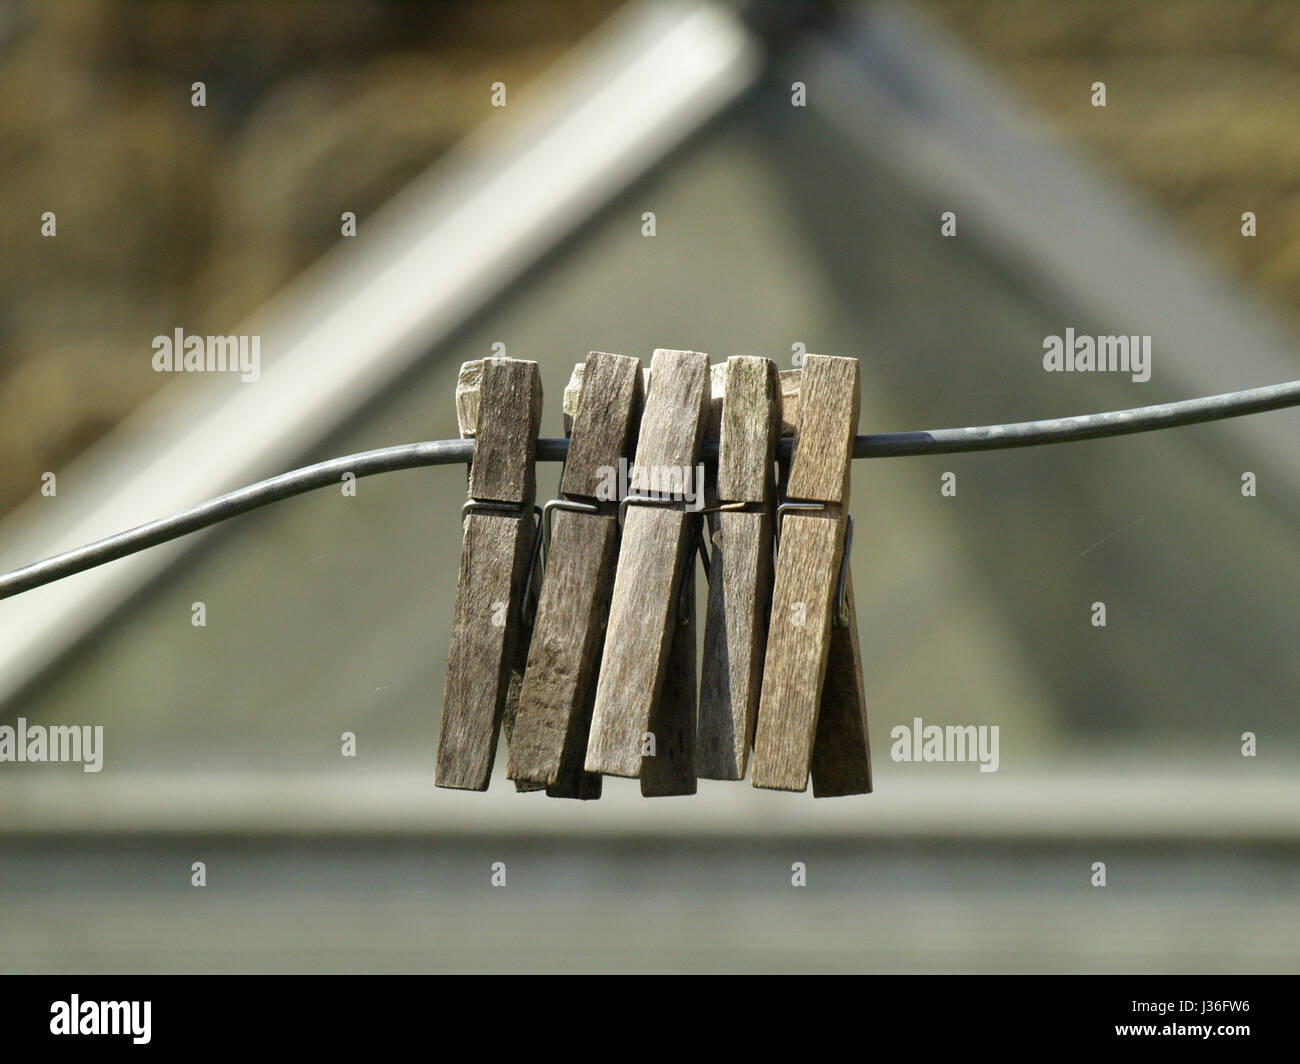 Wooden clothes pegs on a wire washing line Stock Photo